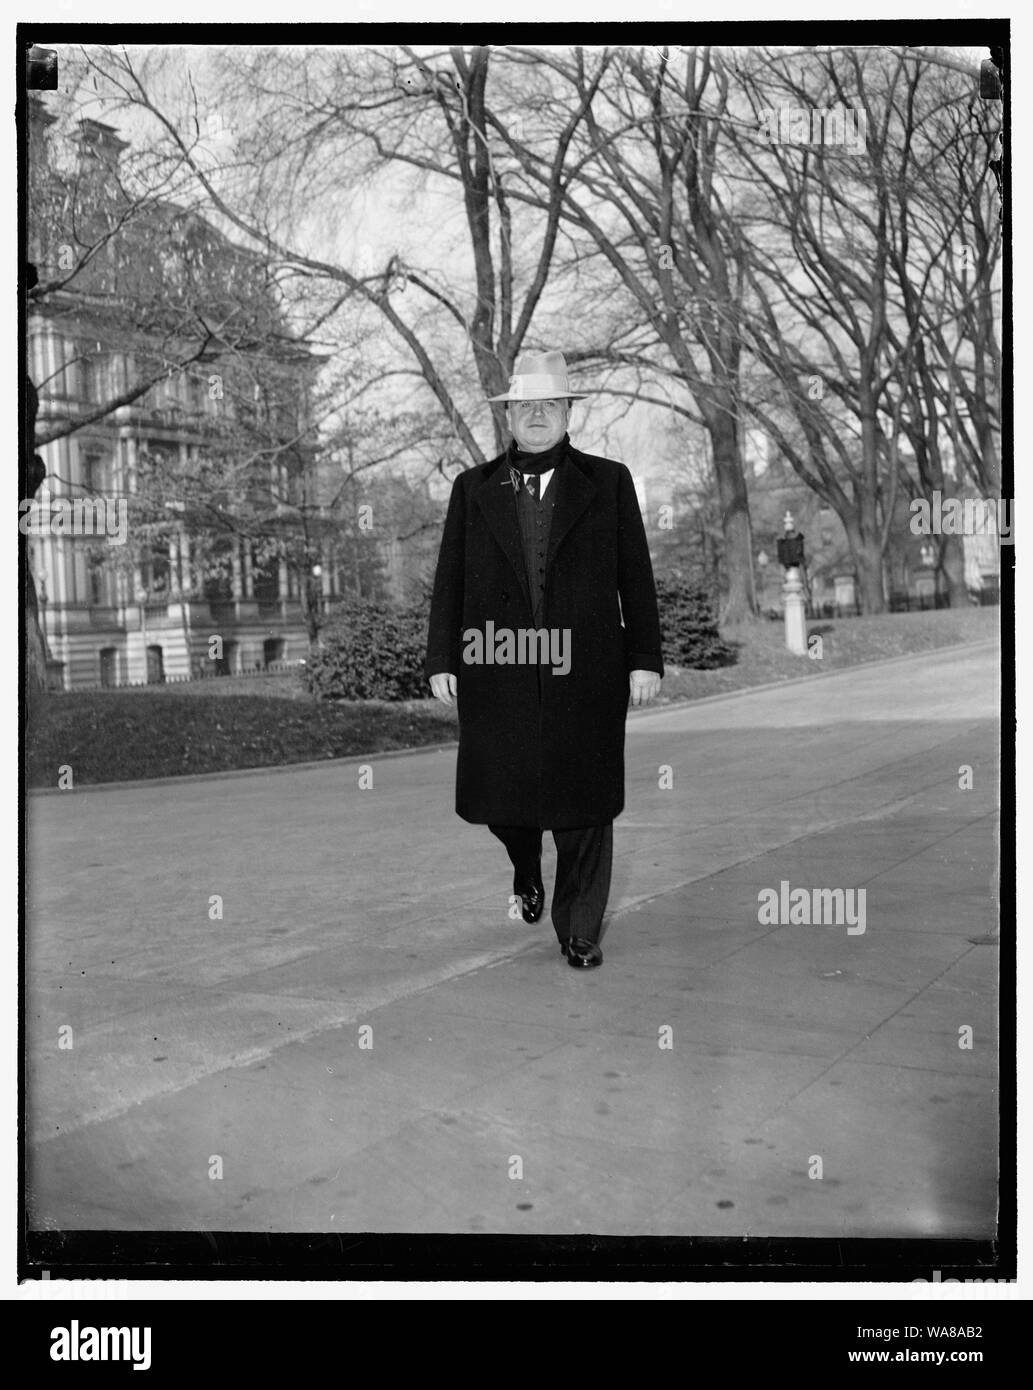 CIO Head calls on president. Washington, D.C., Dec. 19. CIO President John L. Lewis arriving at the White House today where he conferred for 20 minutes with President Roosevelt, he refused to discuss with reporters the nature of his visit but did say, however, that he as there at the president's invitation Stock Photo